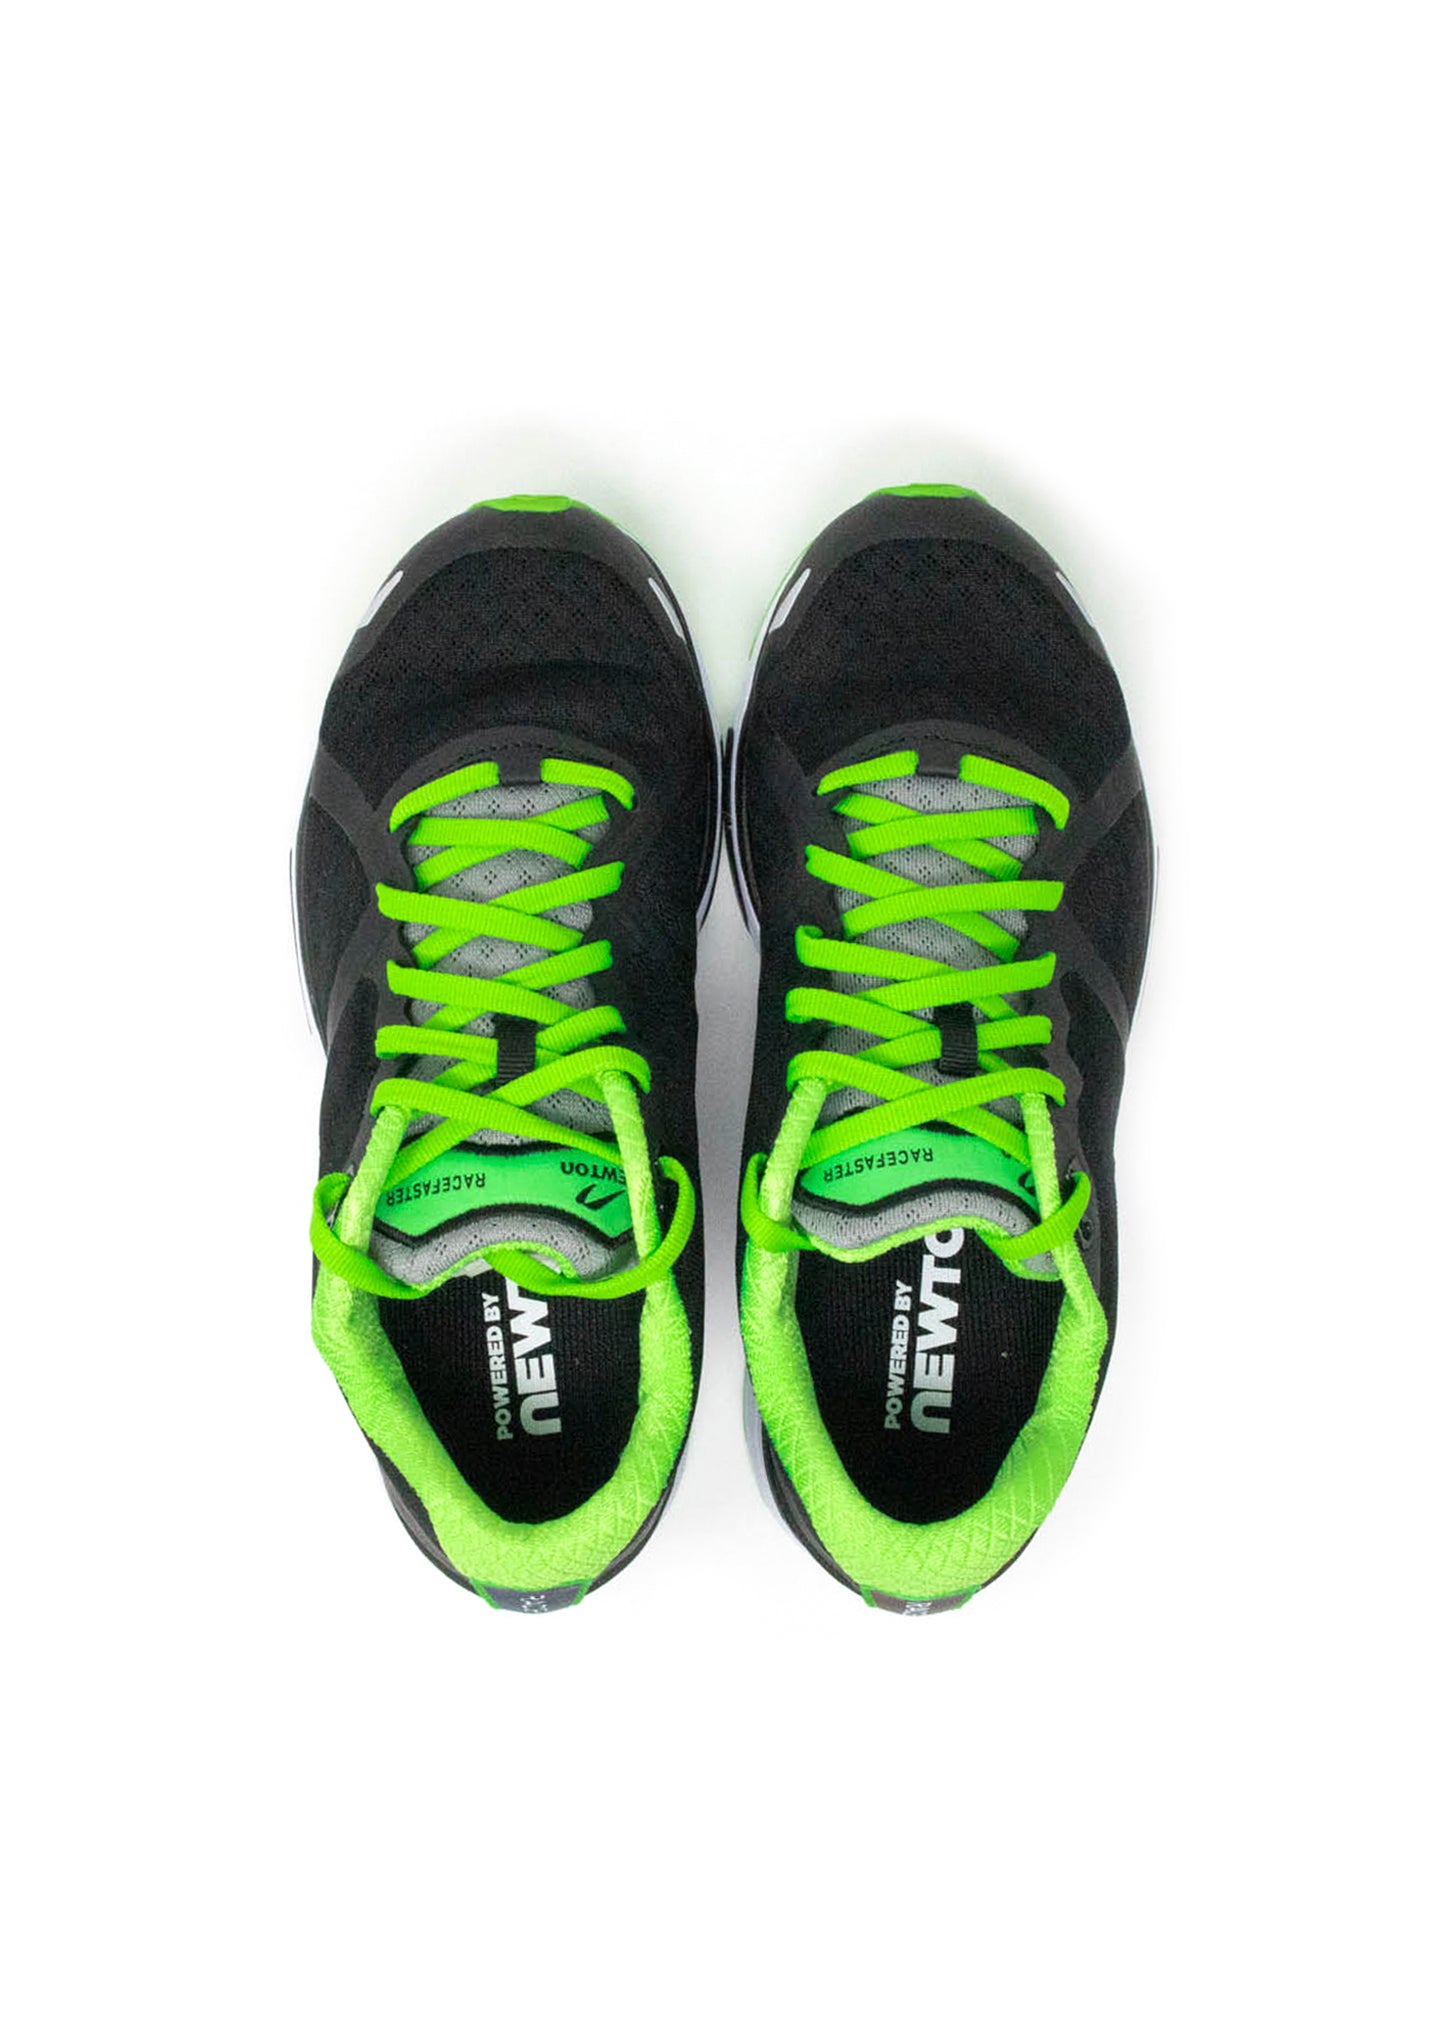 Racefaster FloatHeights - Black/Lime